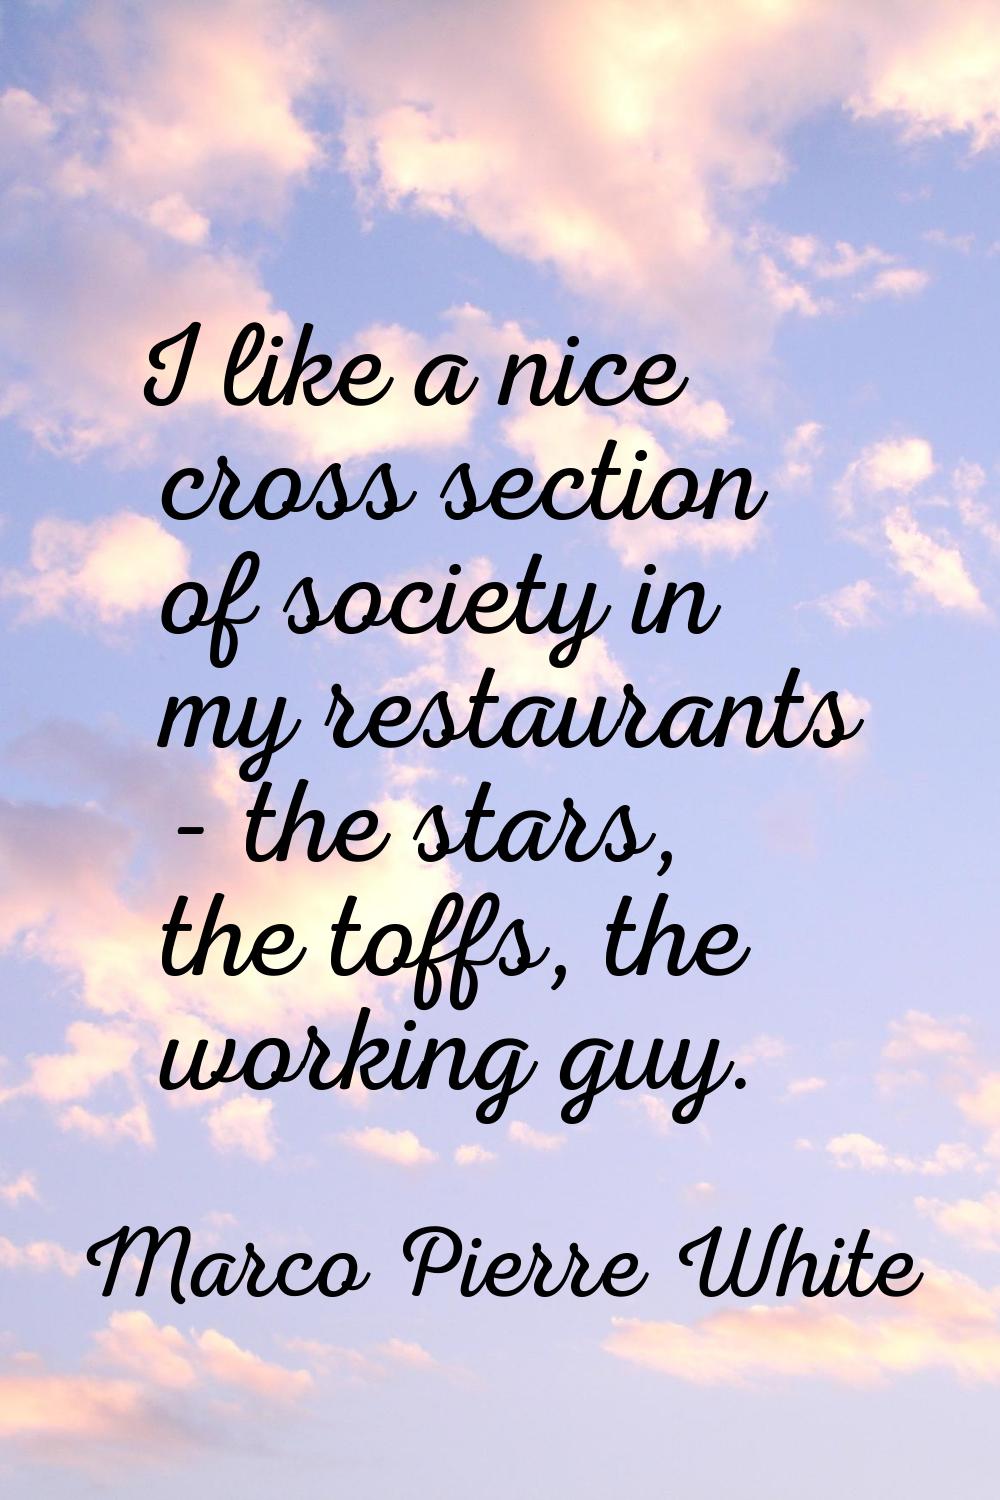 I like a nice cross section of society in my restaurants - the stars, the toffs, the working guy.